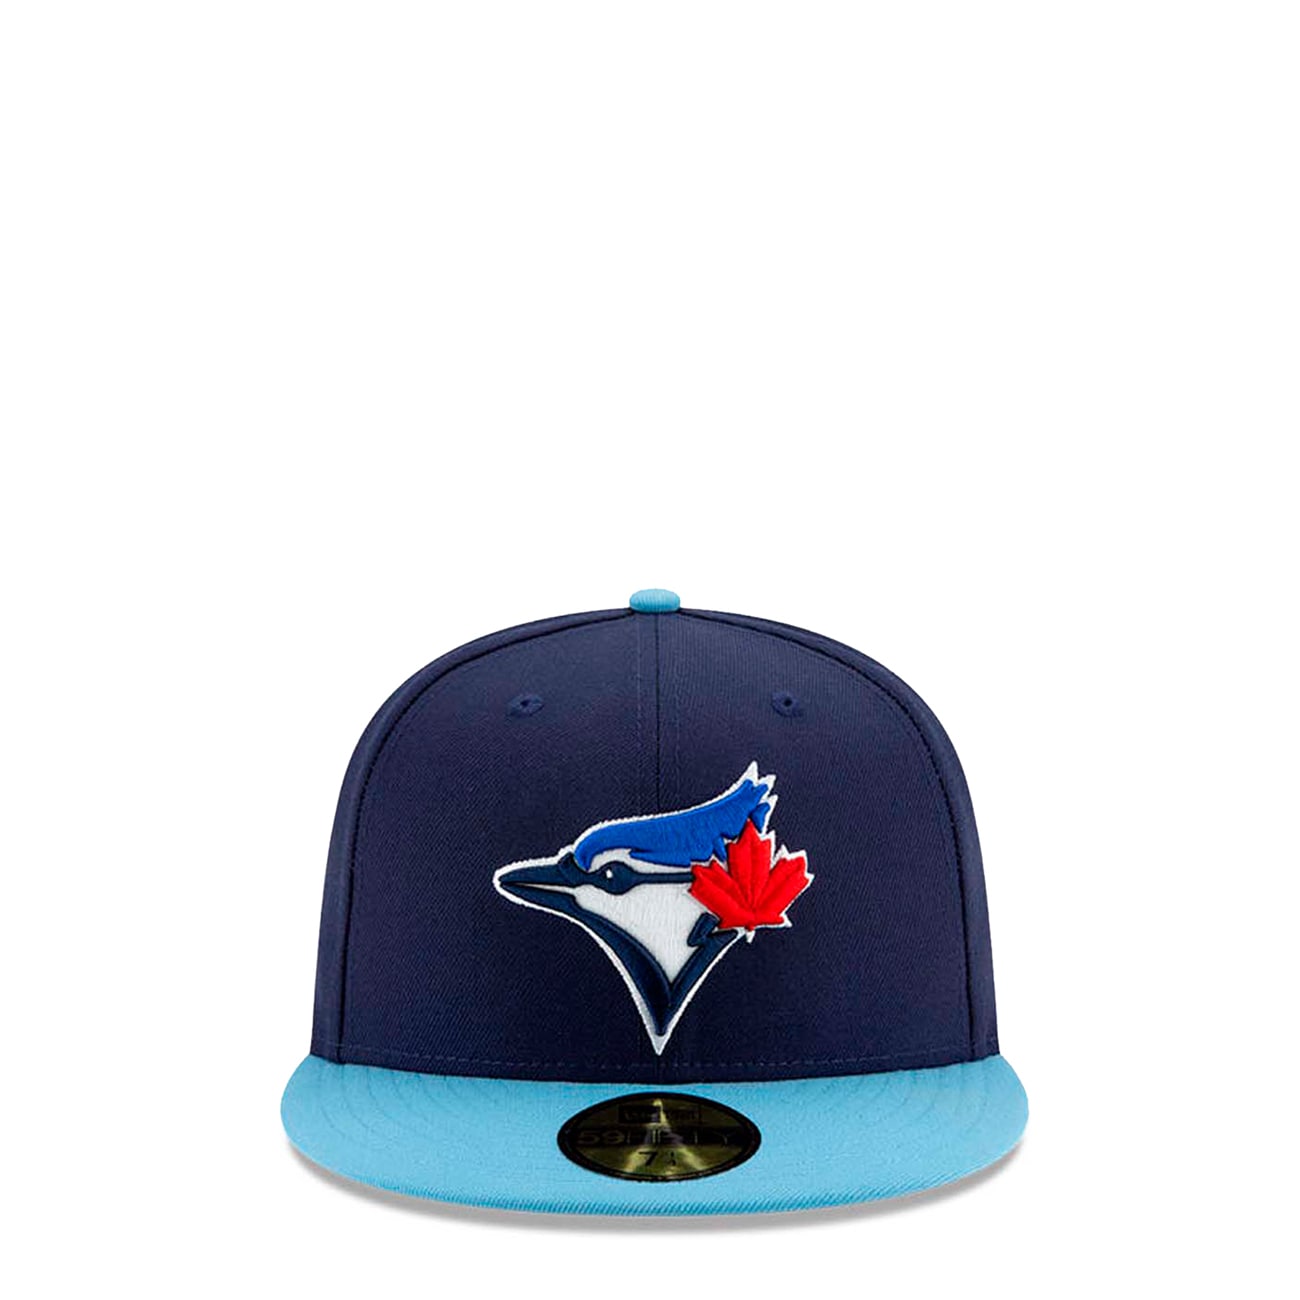 New Era Toronto Blue Jays MLB Authentic Collection Fitted Cap